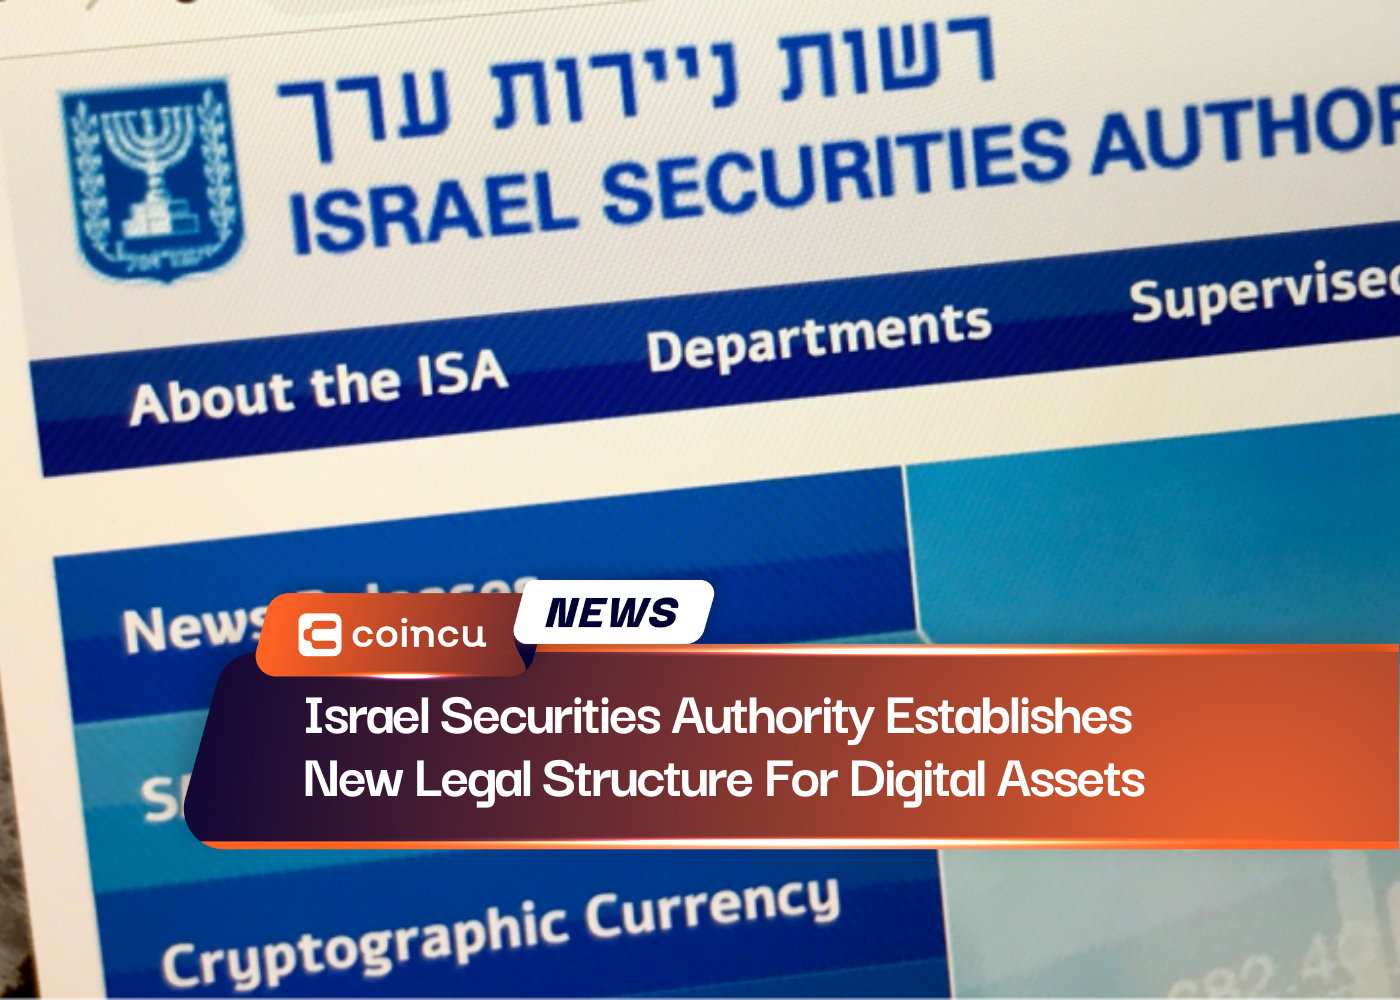 Israel Securities Authority Establishes New Legal Structure For Digital Assets